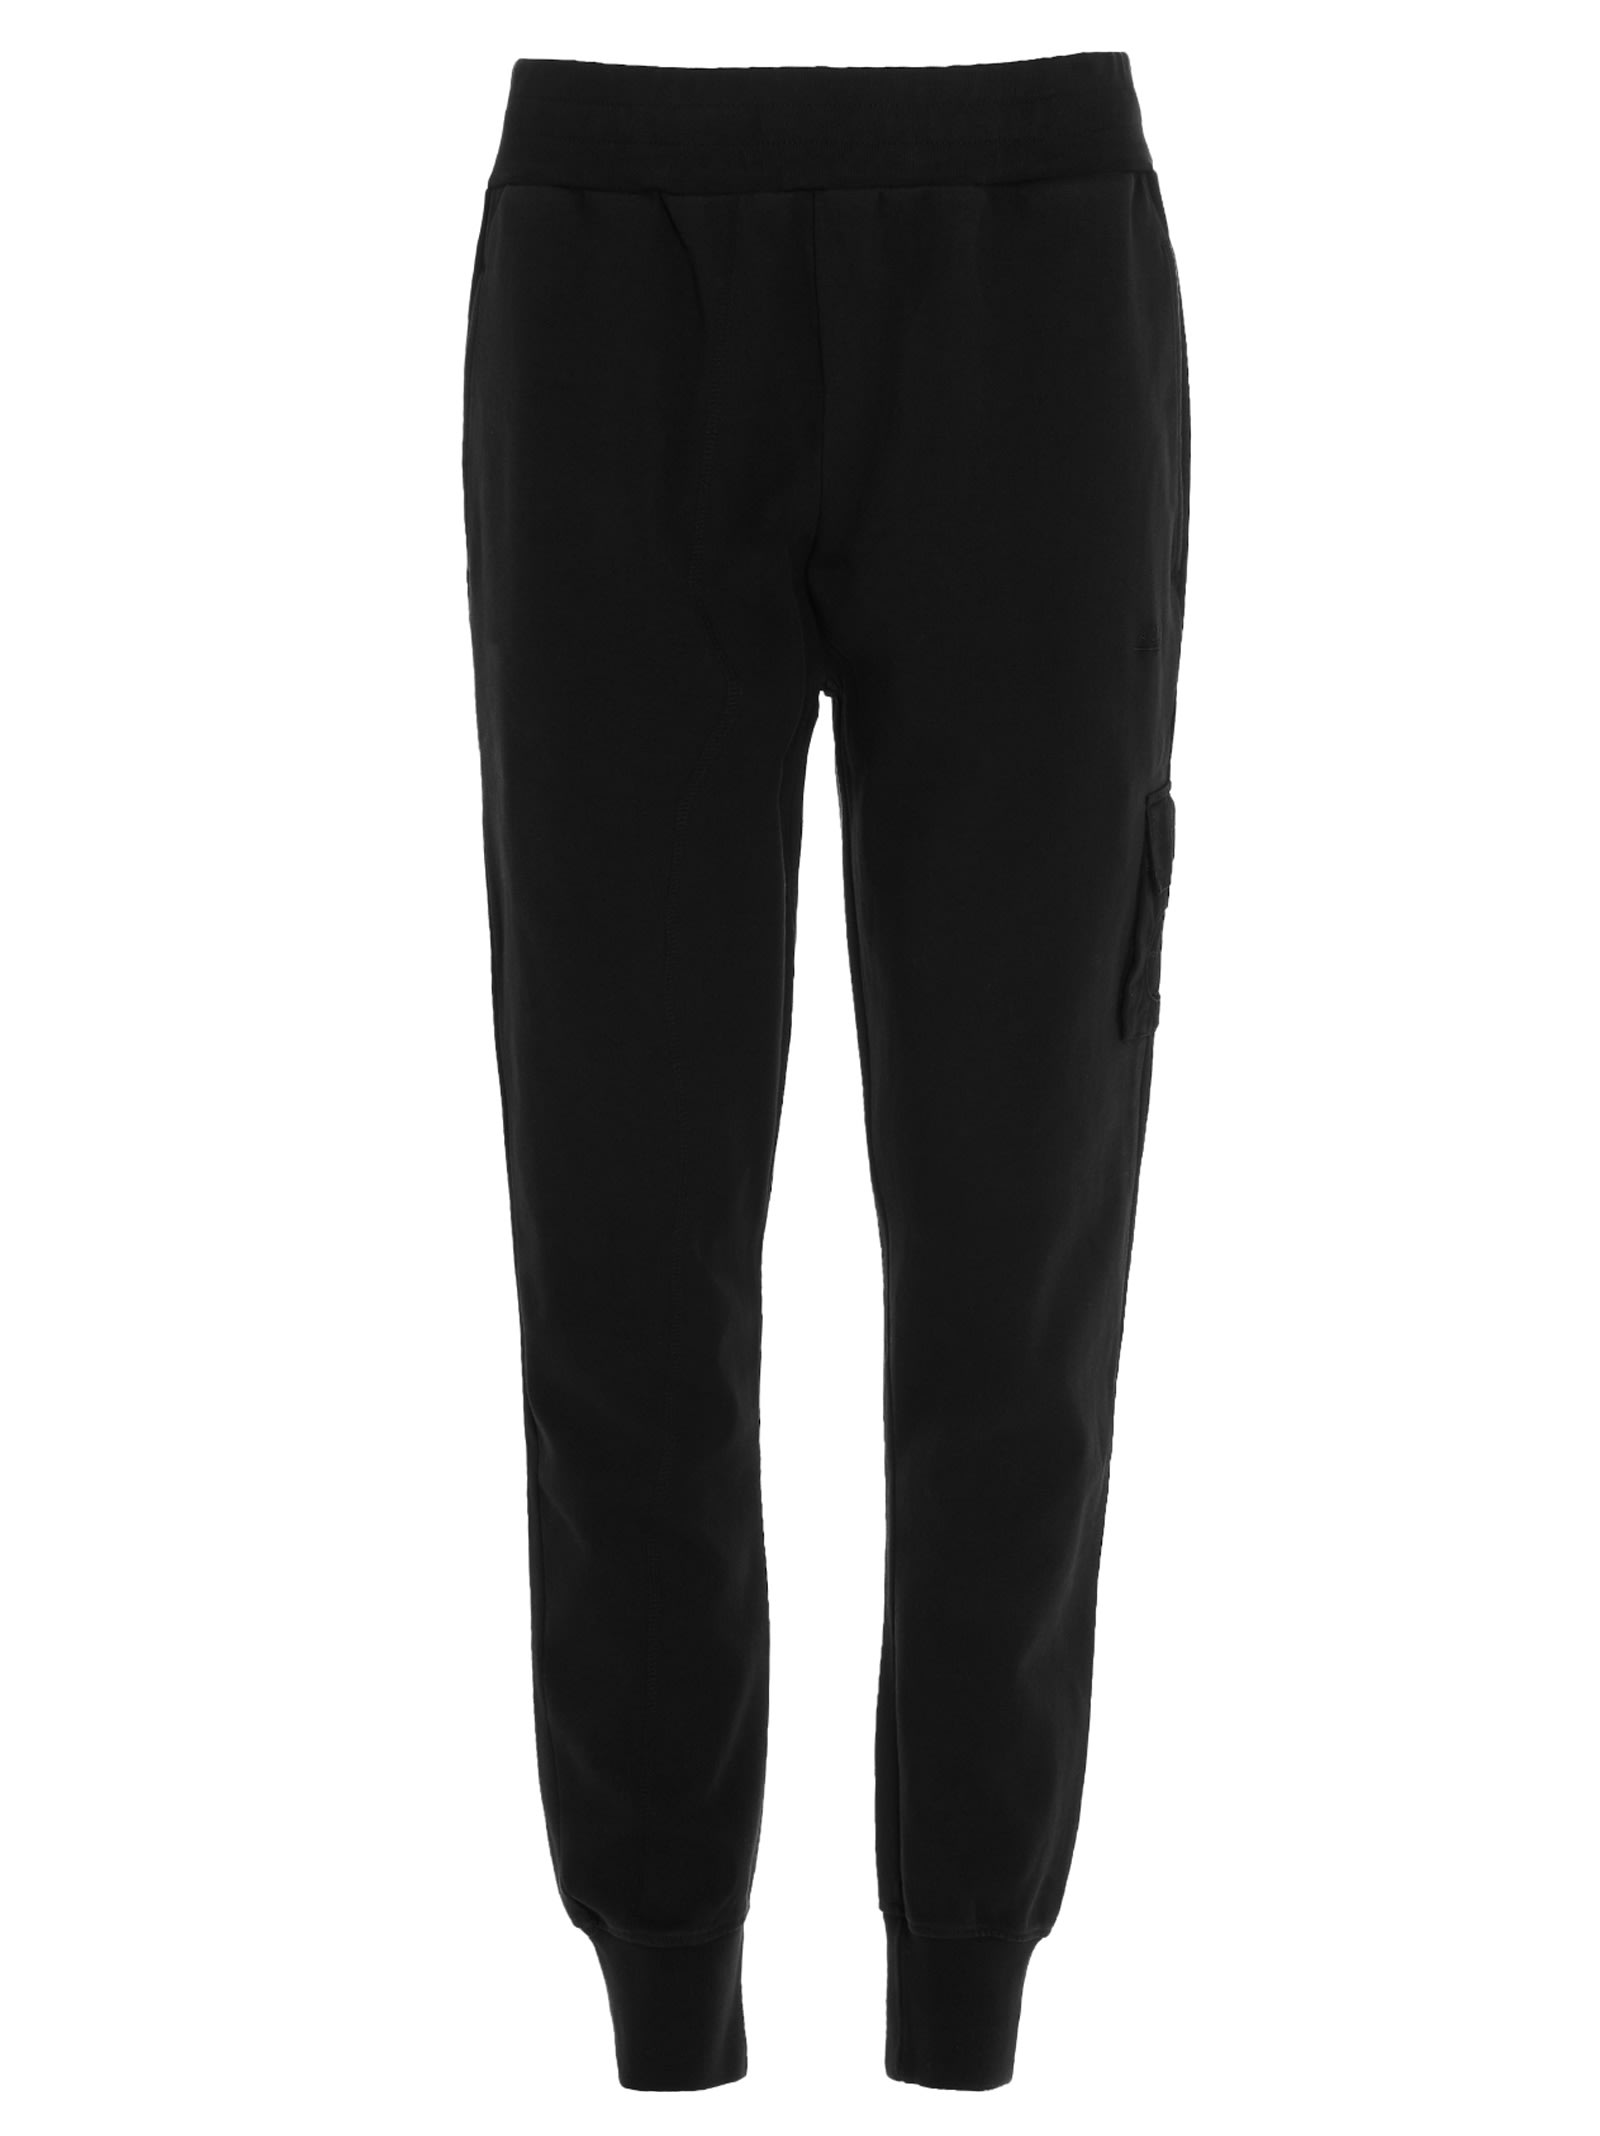 A-COLD-WALL* A-COLD-WALL ESSENTIAL PANTS,ACWMB059 BLACK